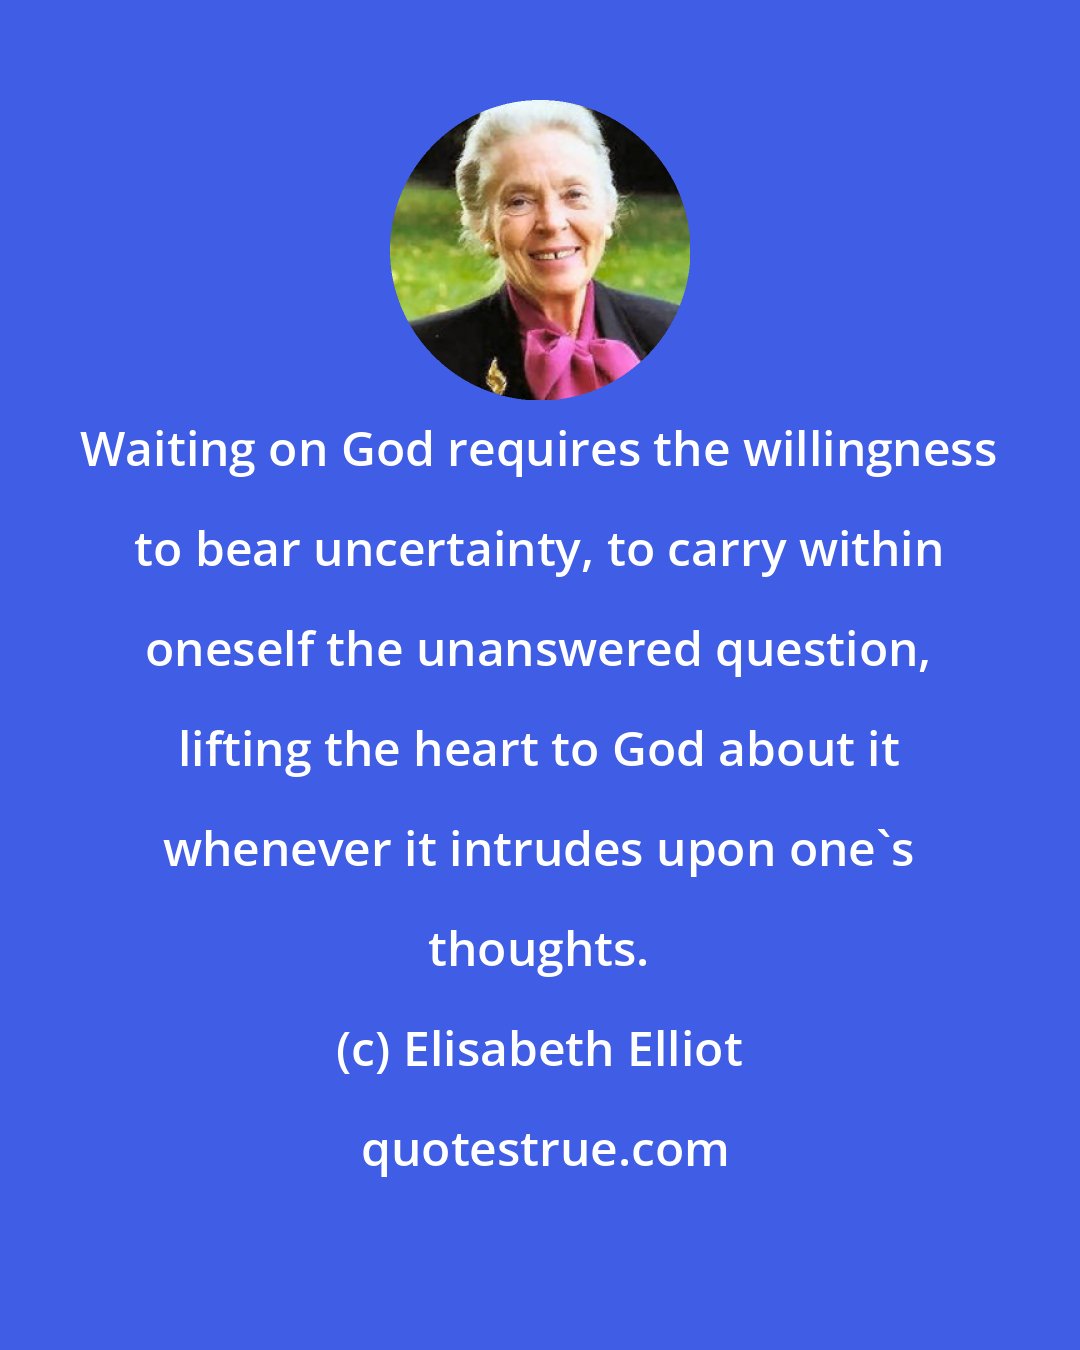 Elisabeth Elliot: Waiting on God requires the willingness to bear uncertainty, to carry within oneself the unanswered question, lifting the heart to God about it whenever it intrudes upon one's thoughts.